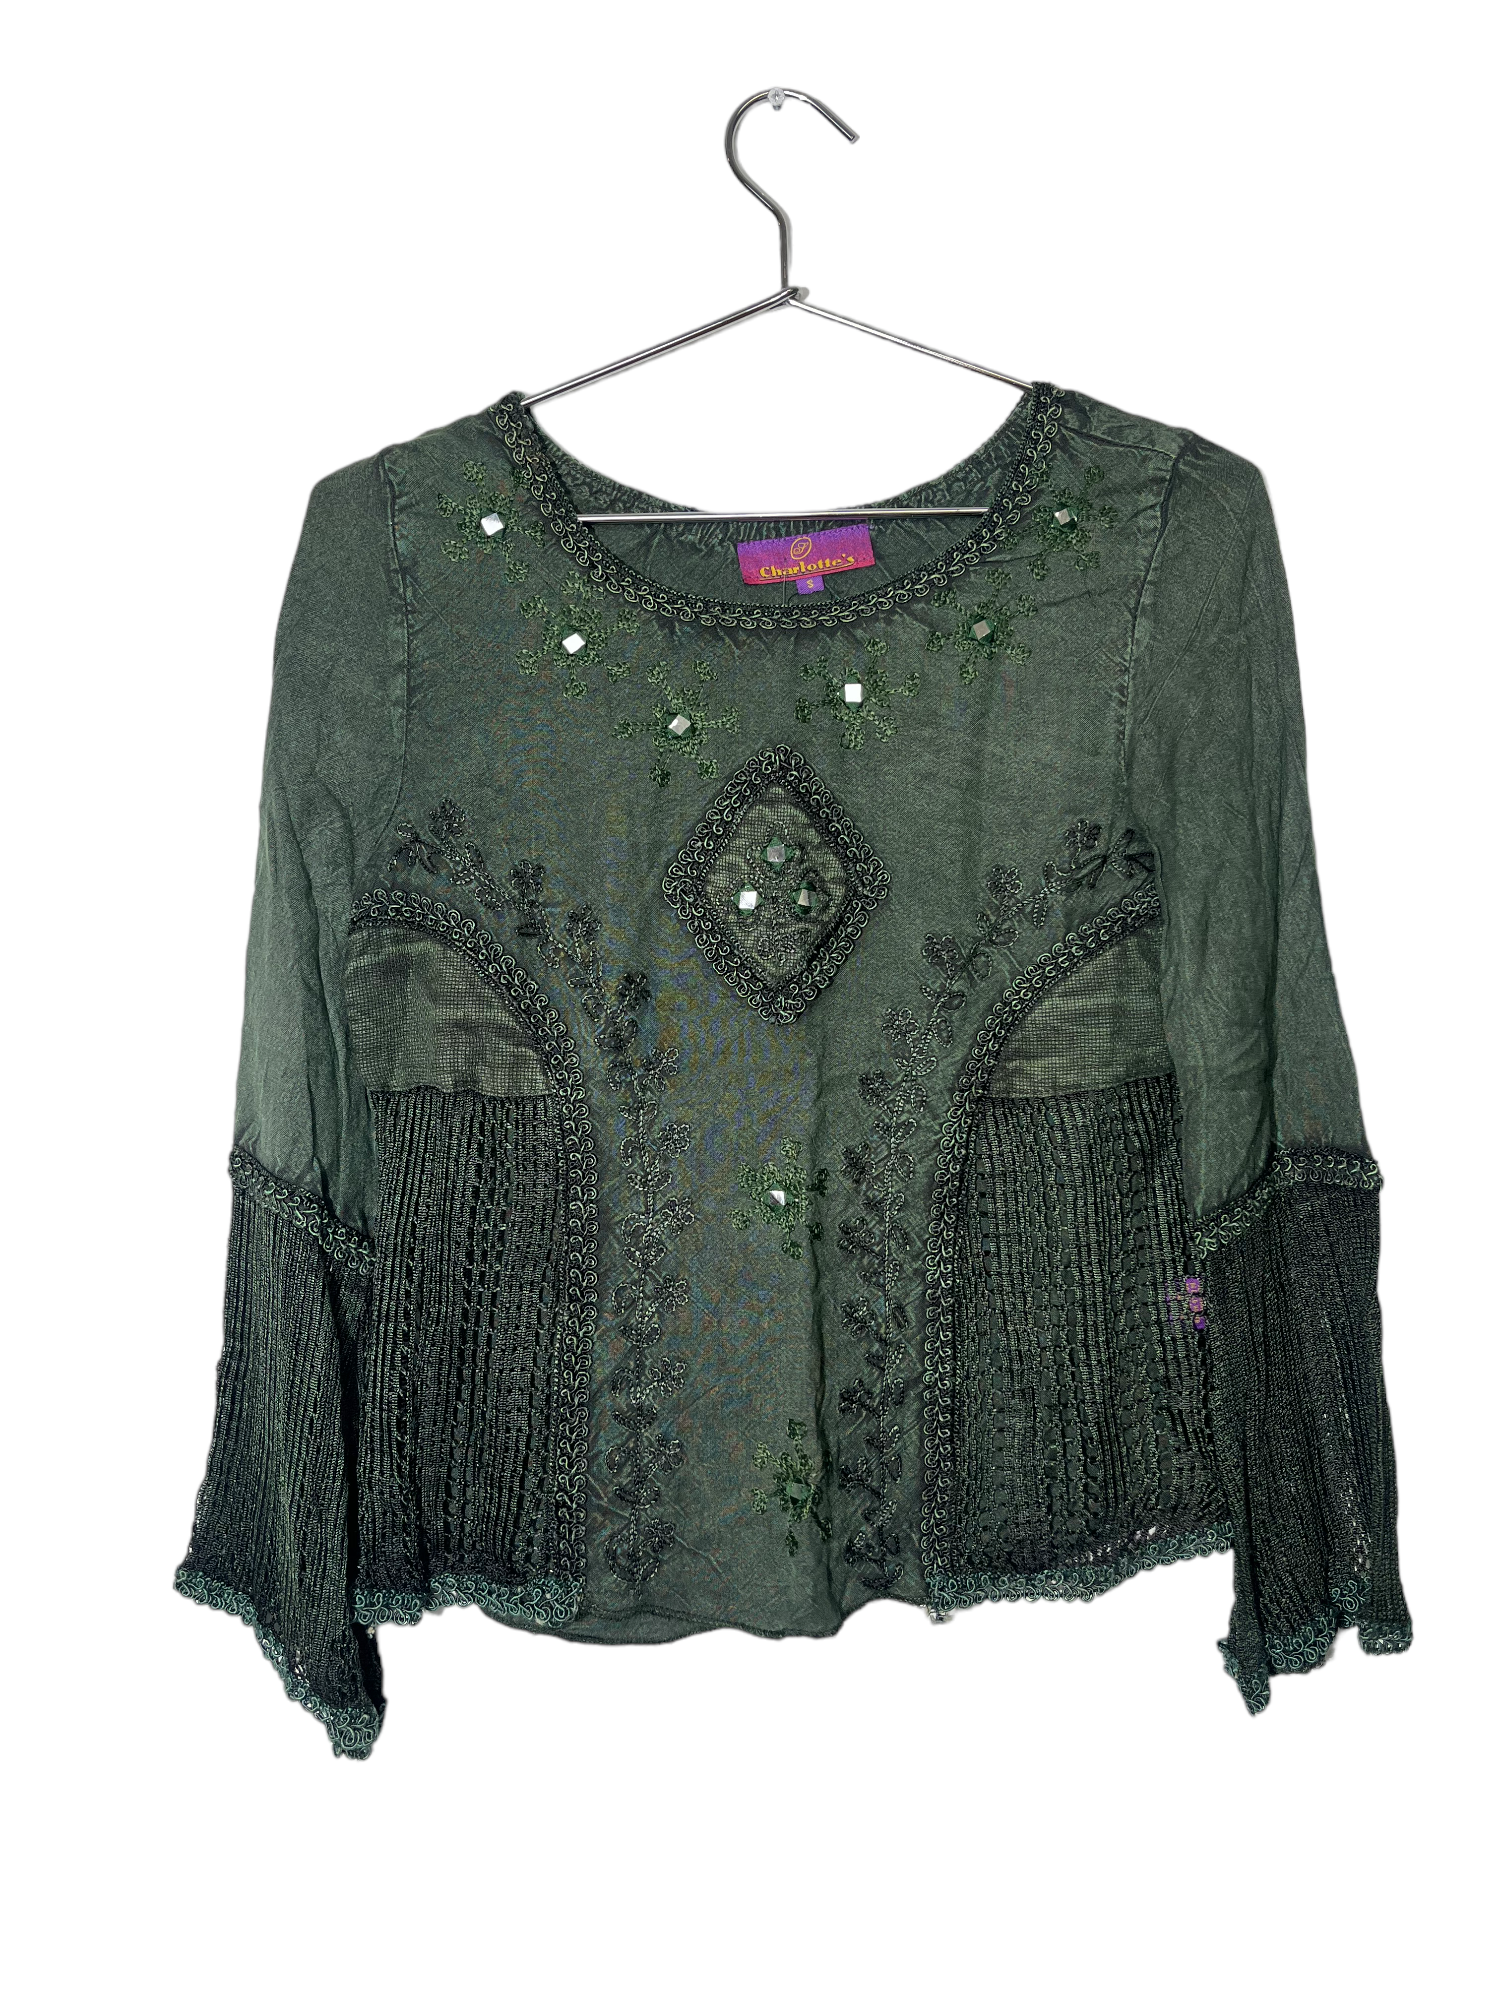 Charlotte’s Green Bell Sleeve Embroidered Top